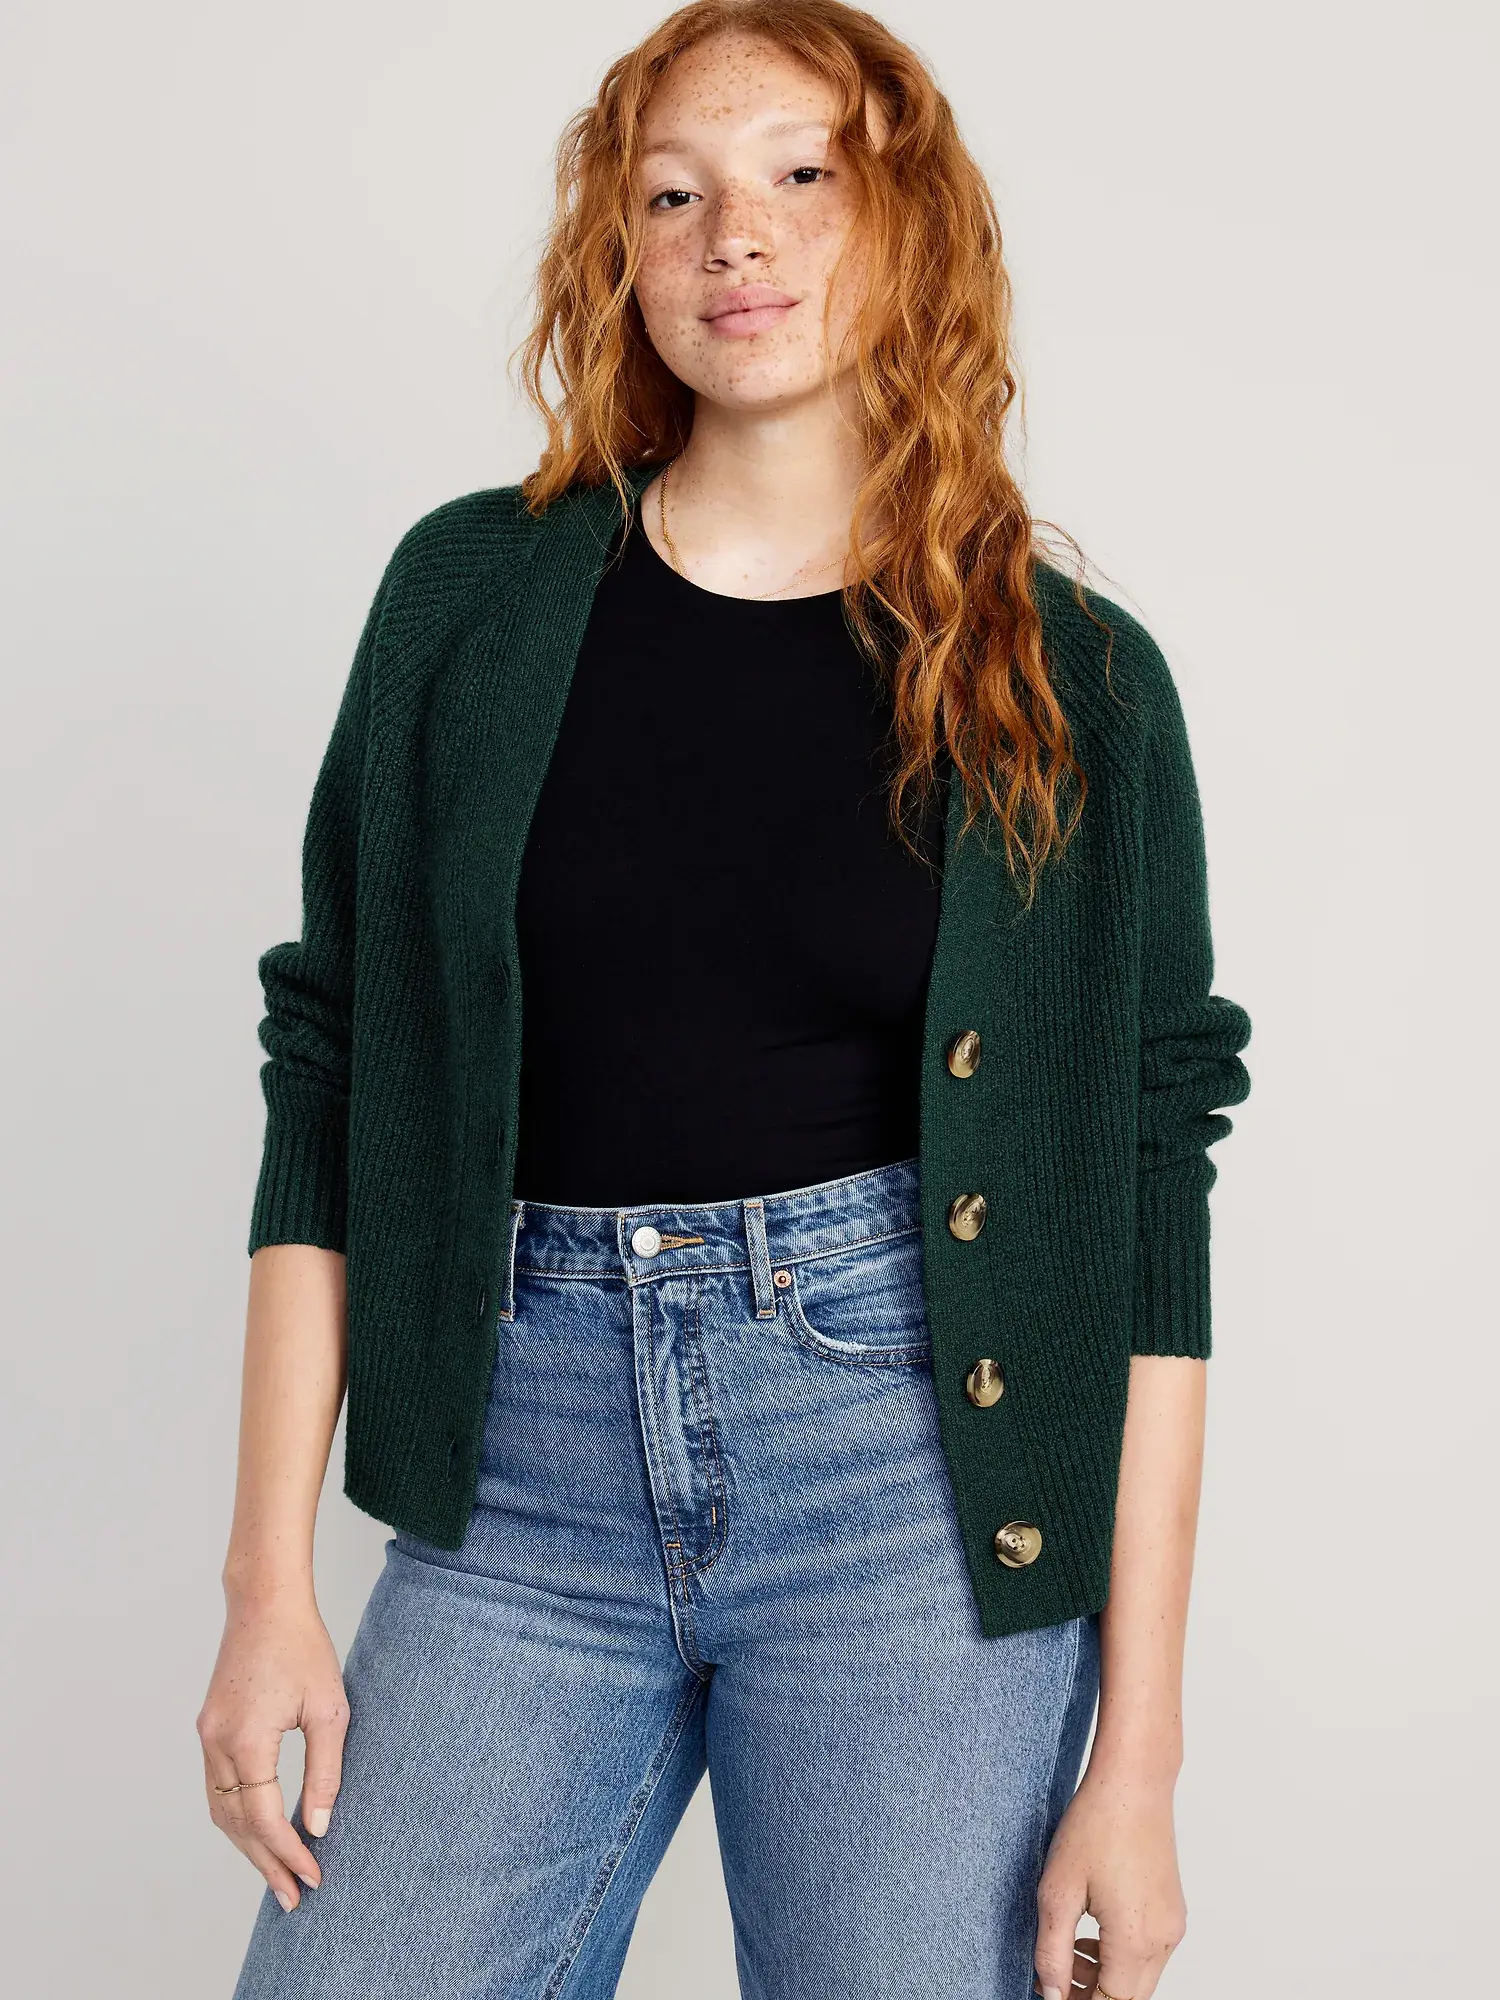 Old Navy Shaker-Stitch Cardigan Sweater for Women green. 1